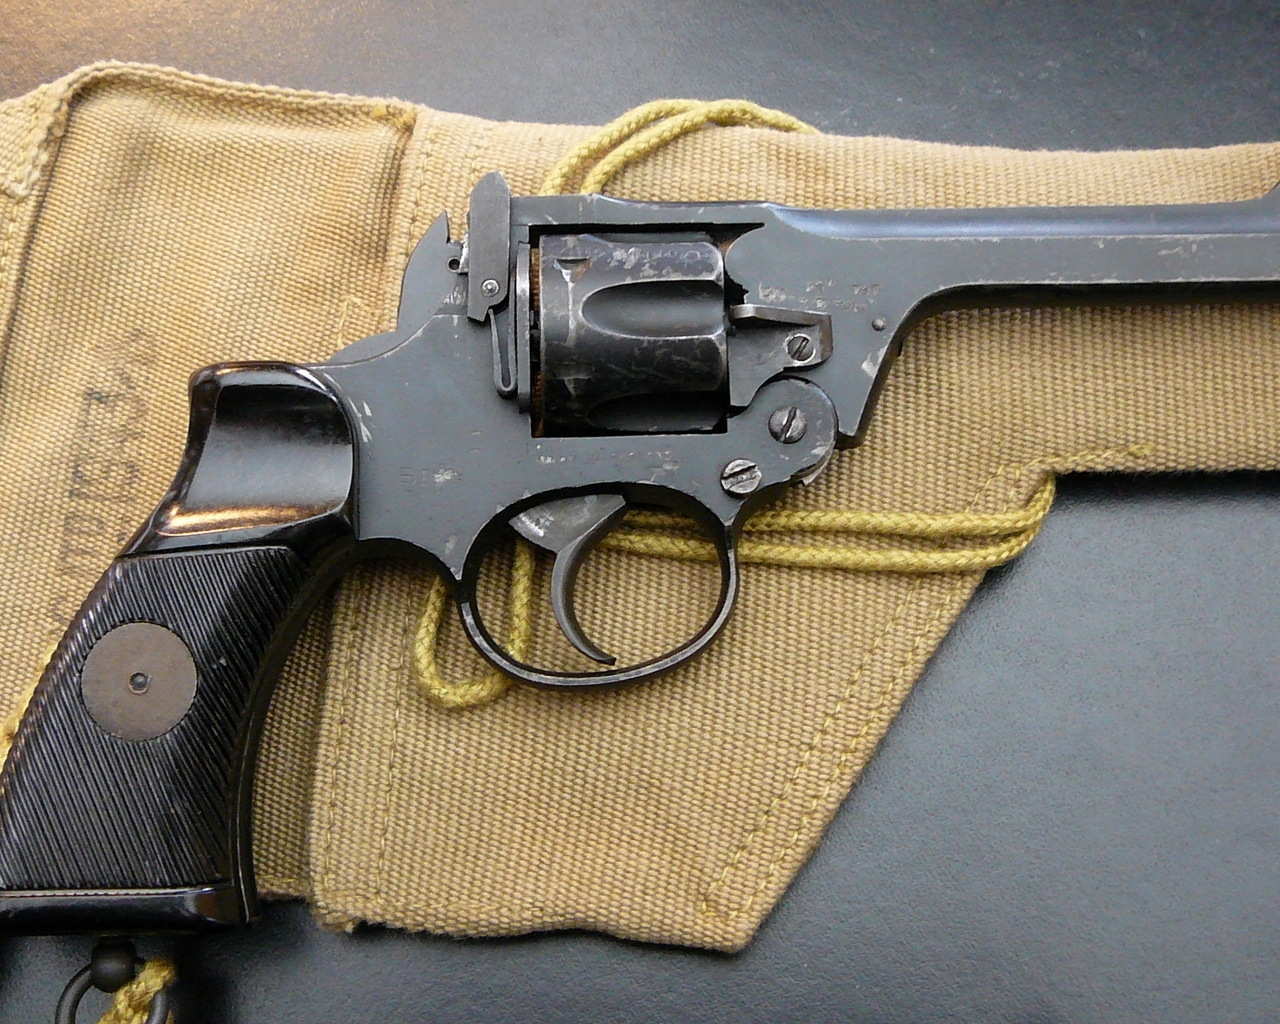 Old Pistol for 1280 x 1024 resolution